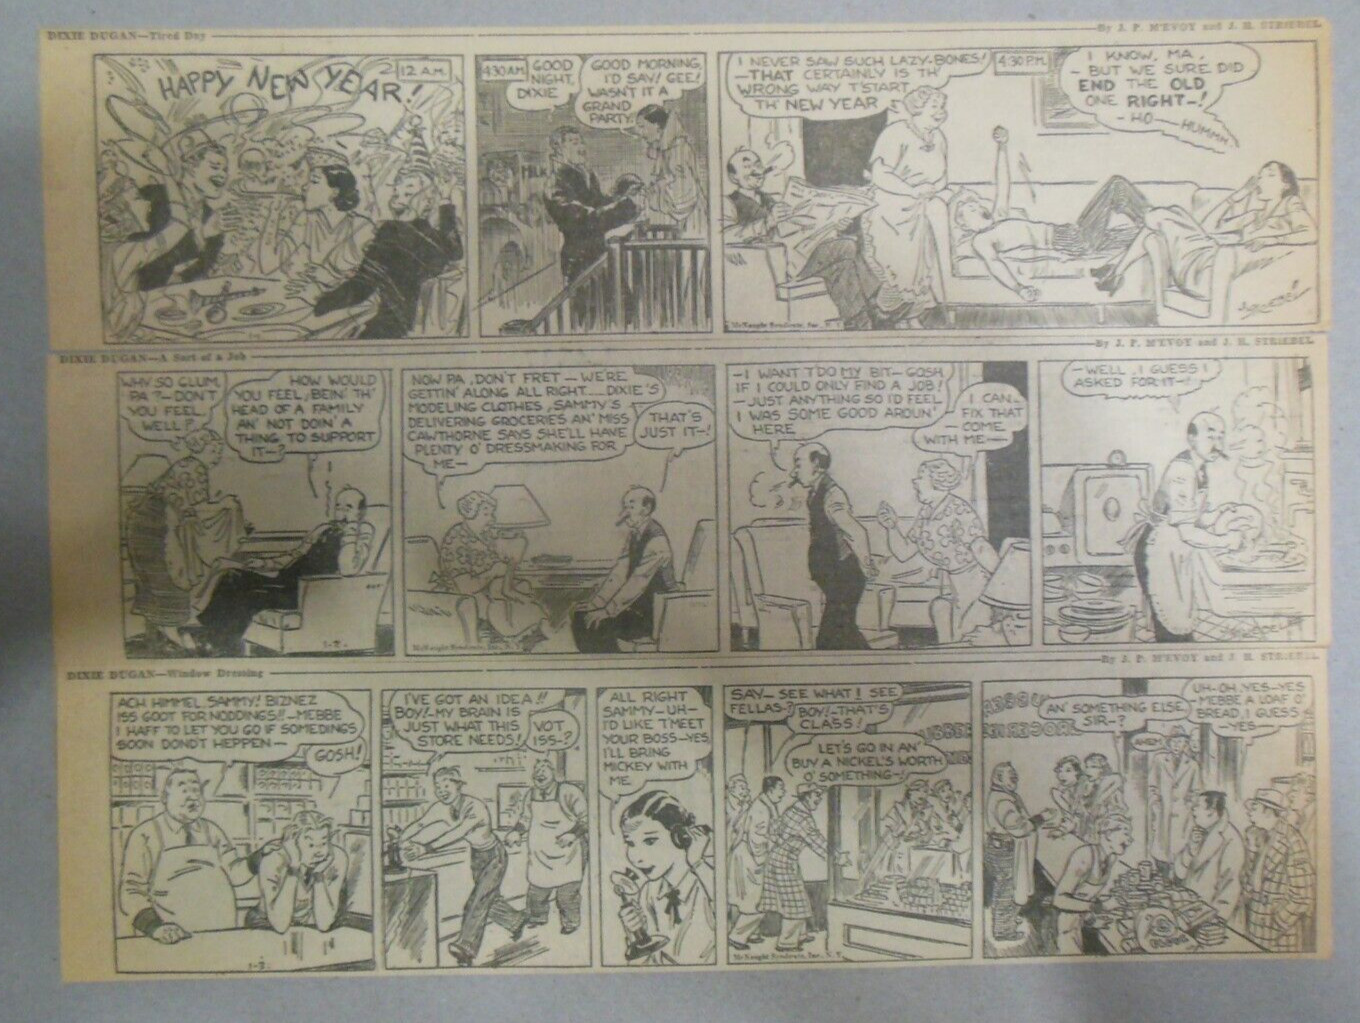 (303) Dixie Dugan Dailies by McEvoy & Striebel from 1936 Size: 3 x 12 inches